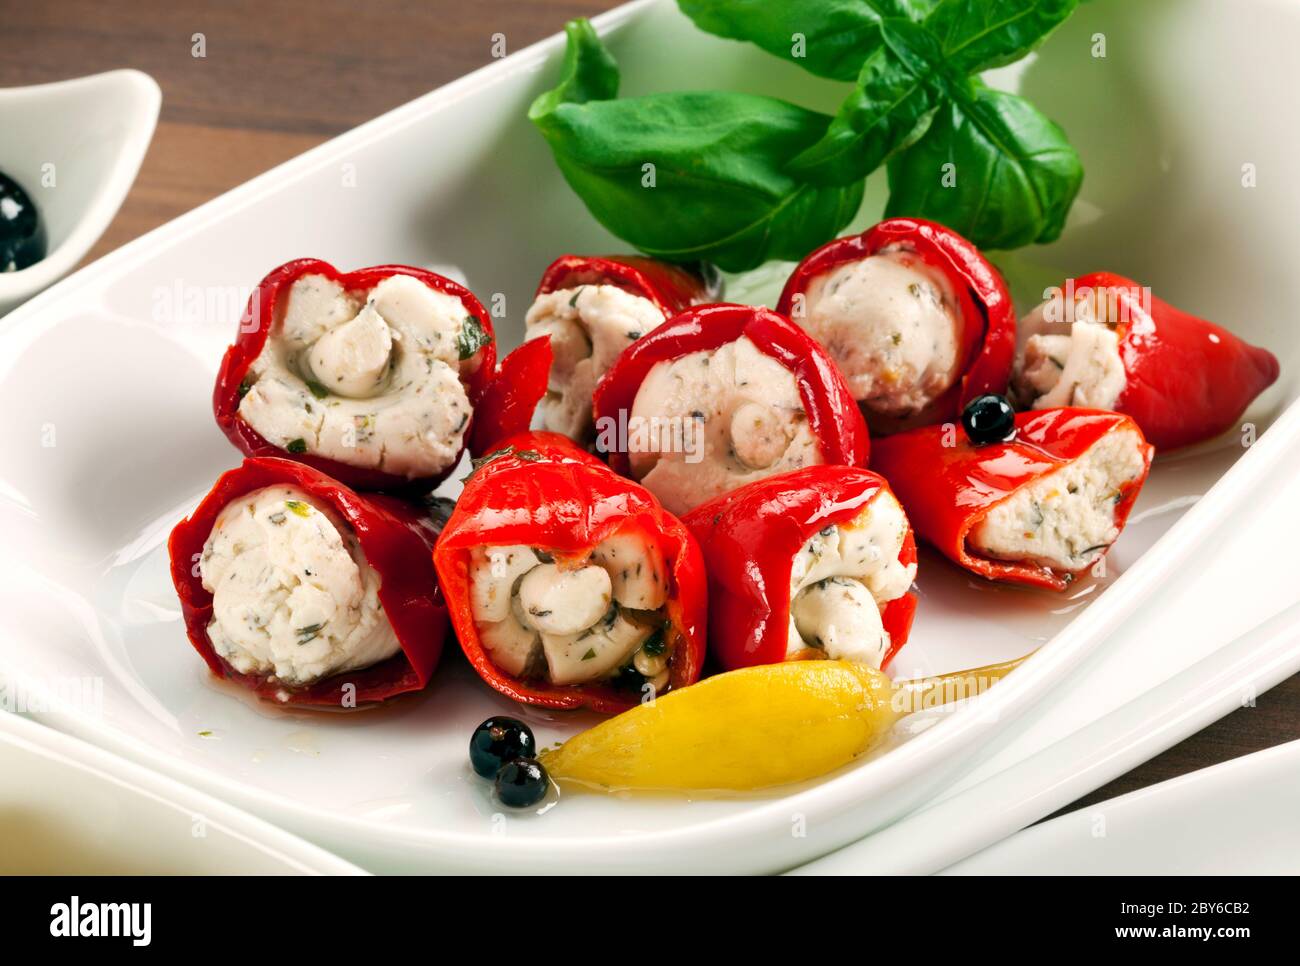 Italian cuisine, antipasti. Closeup of red peppers filled with a cream of goat cheese and herbs Stock Photo